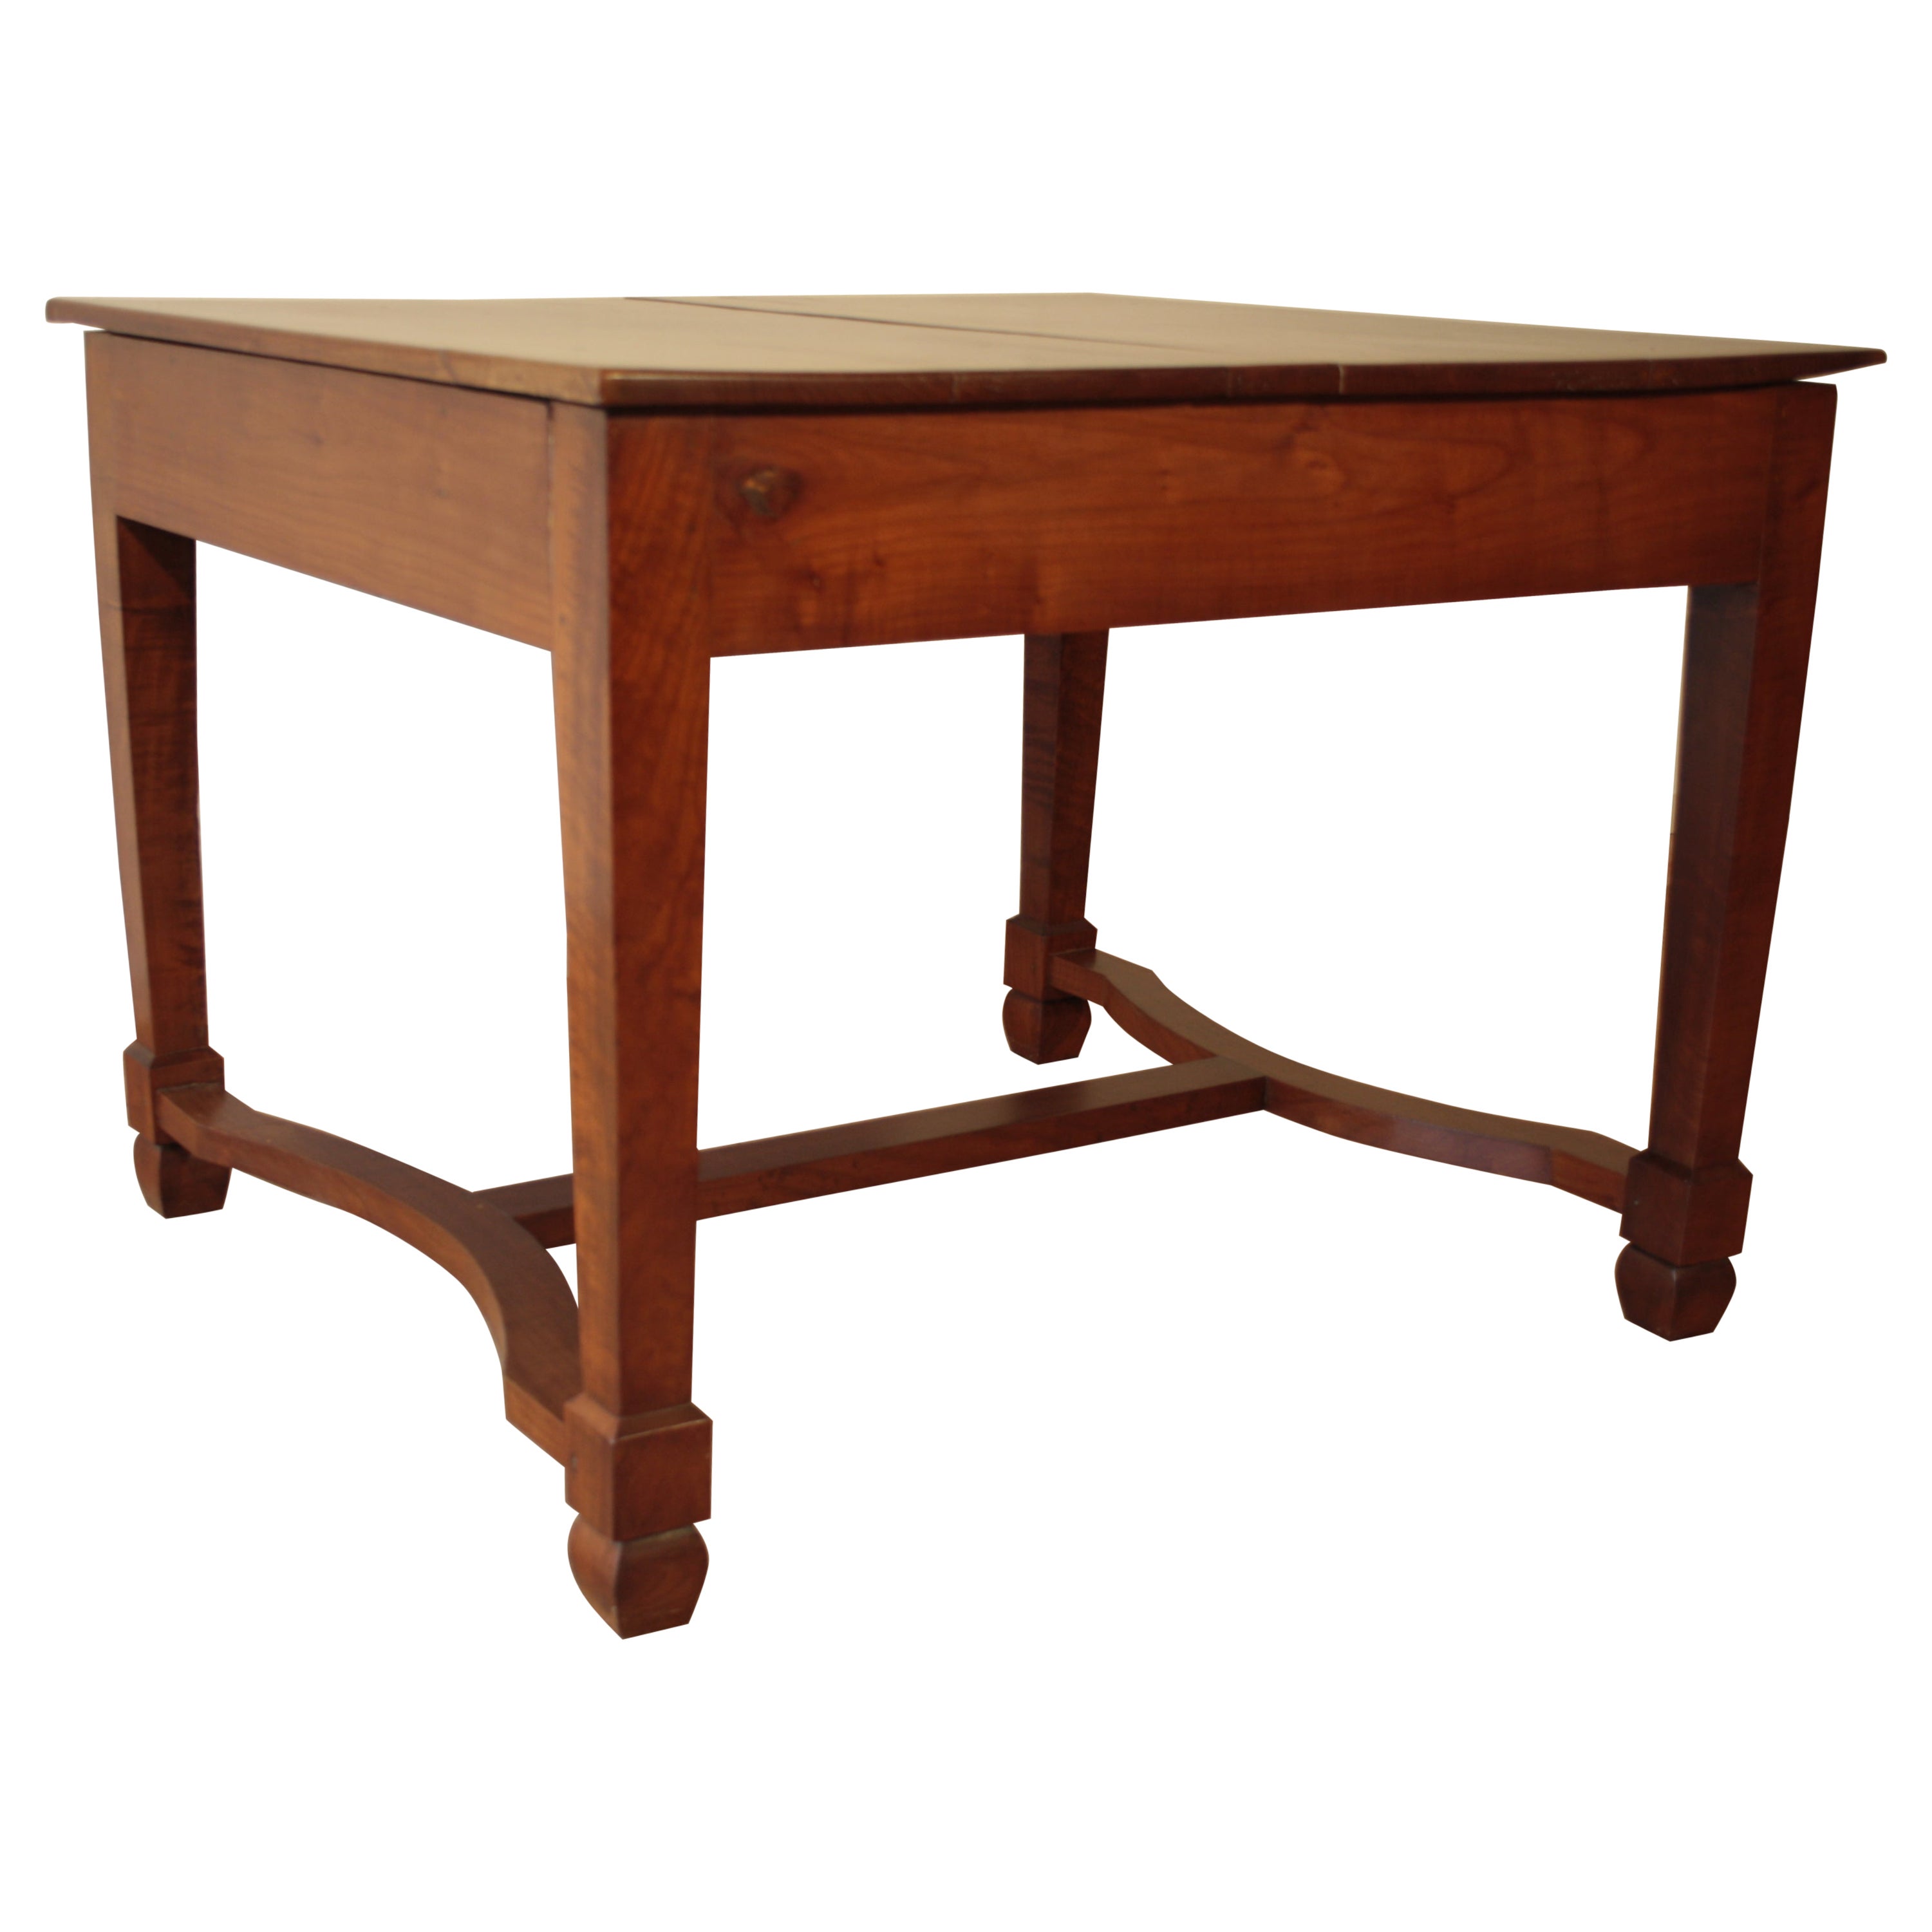 Antique Liberty Italian Dining Table, 1920s Rosewood Solid Wood Extensible